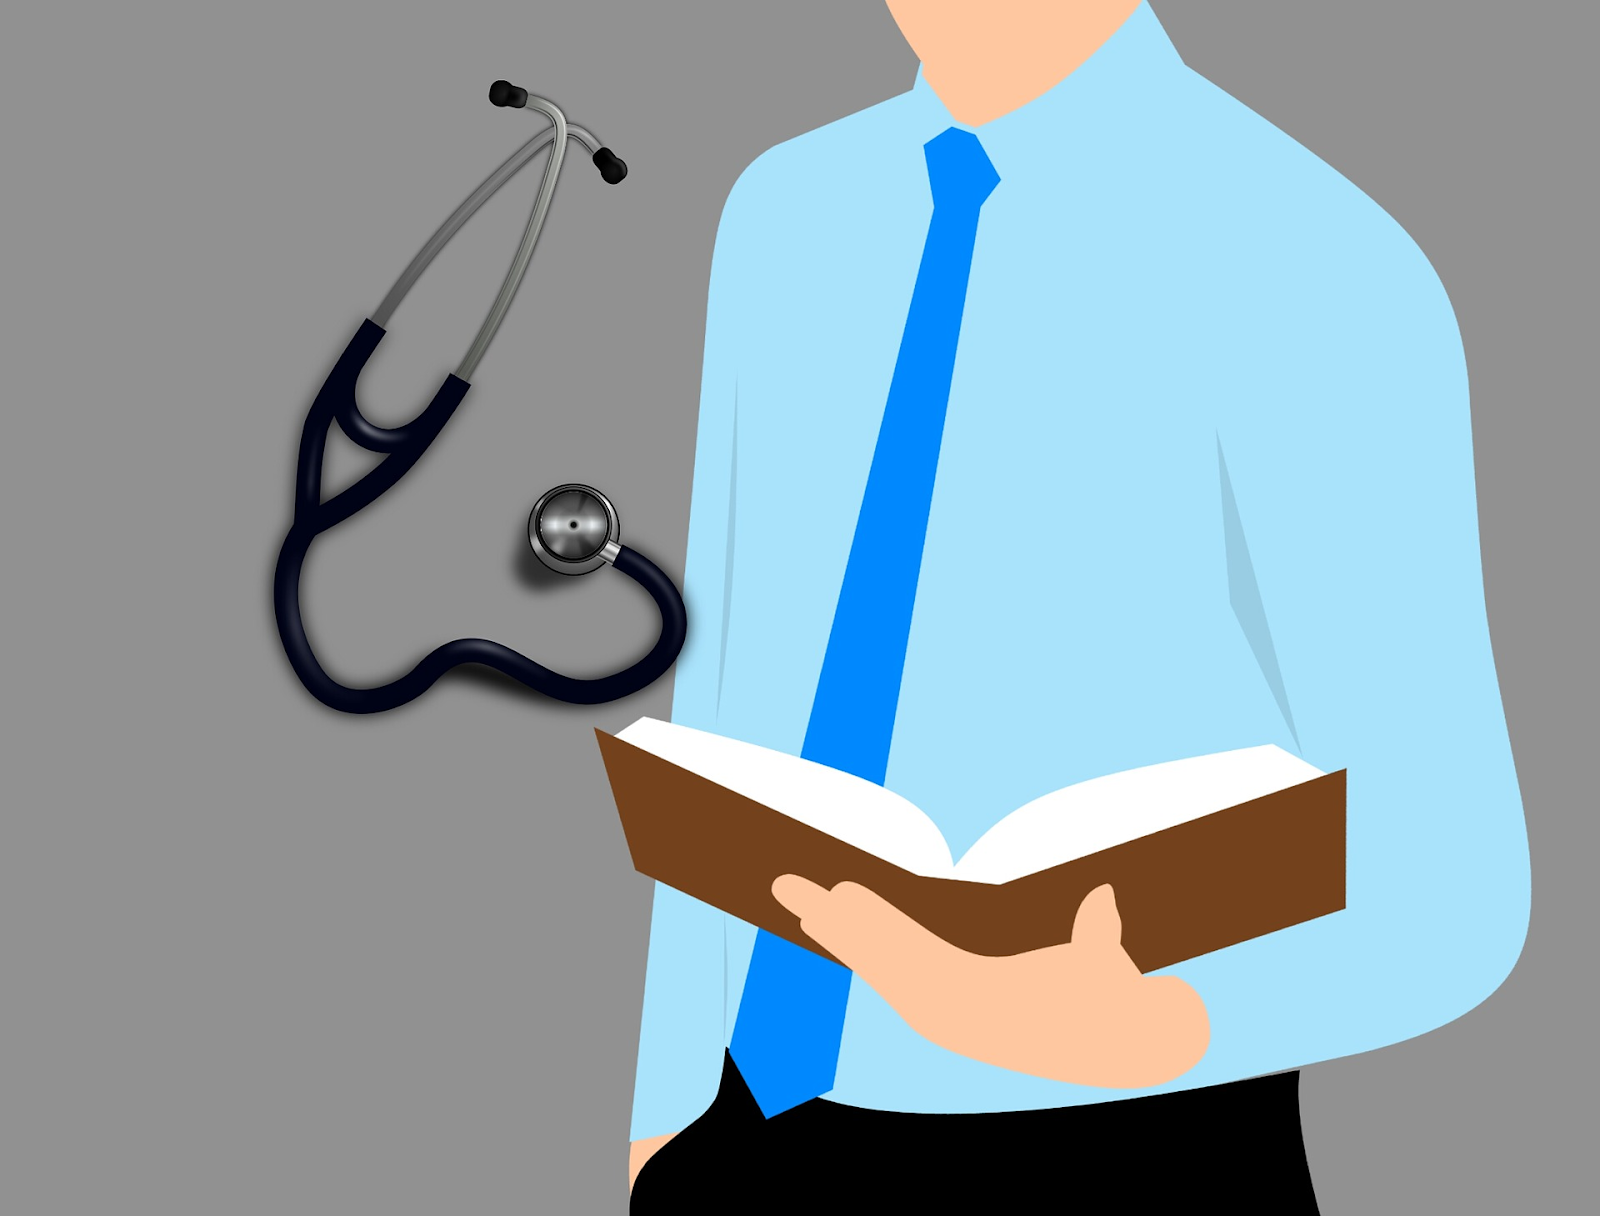 How To Get Into Medical Writing